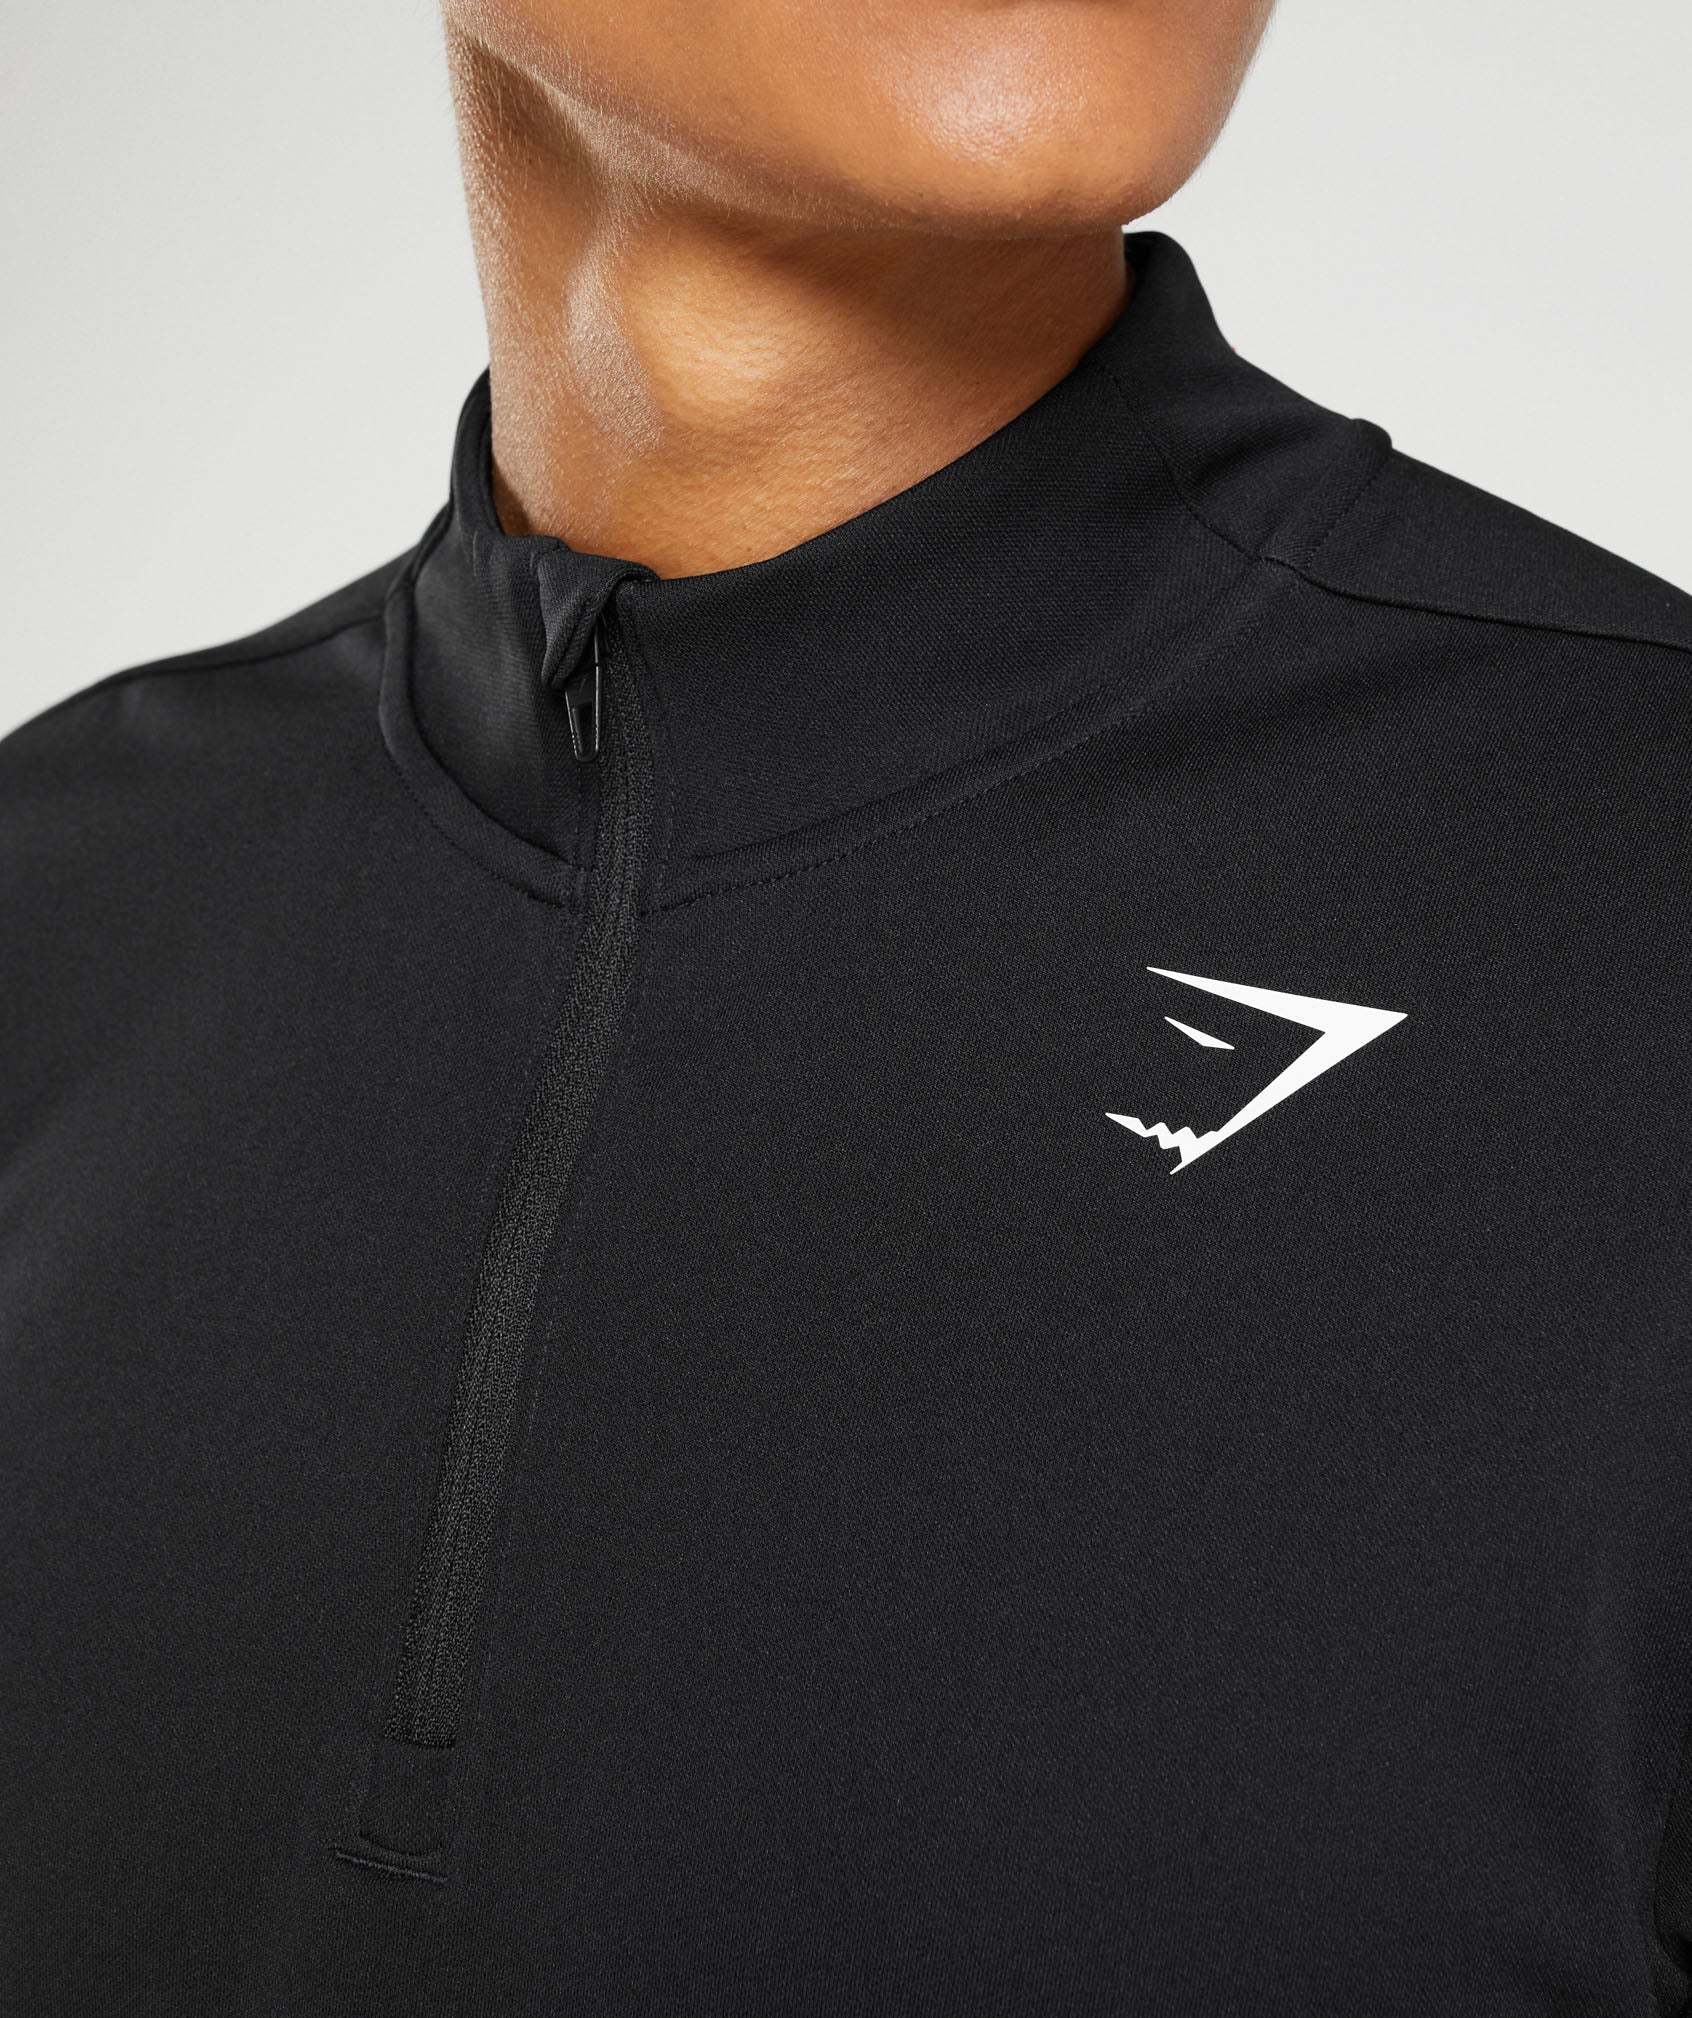 Arrival 1/4 Zip Pullover in Black - view 3